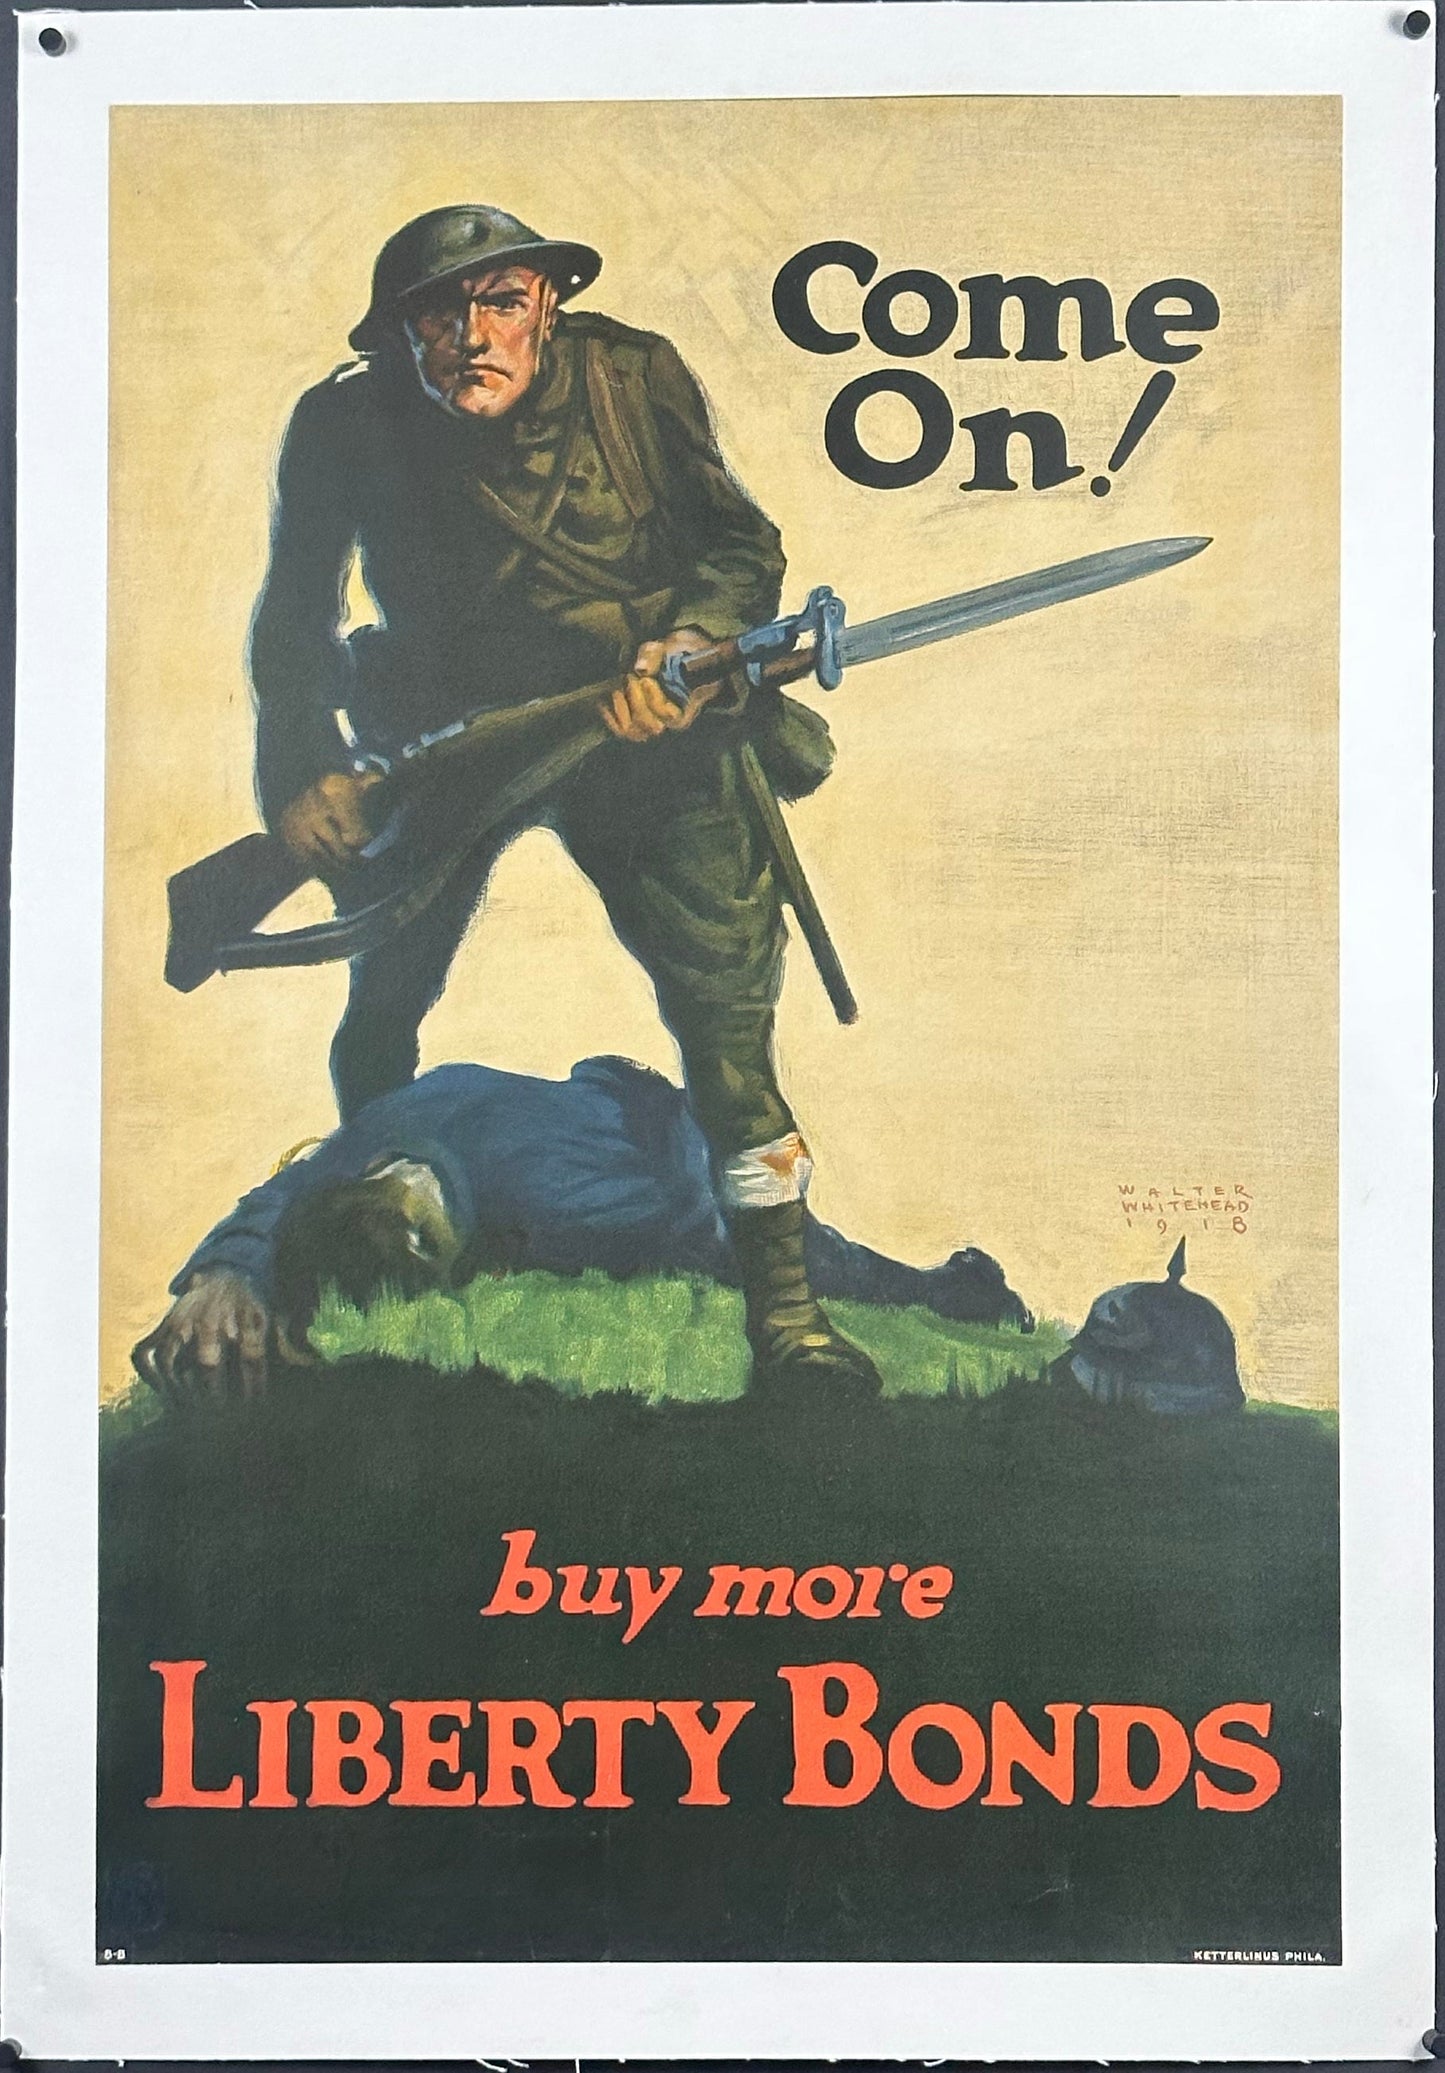 "Come On!" WWI Home Front Bonds Poster by Walter Whitehead (1917) - posterpalace.com